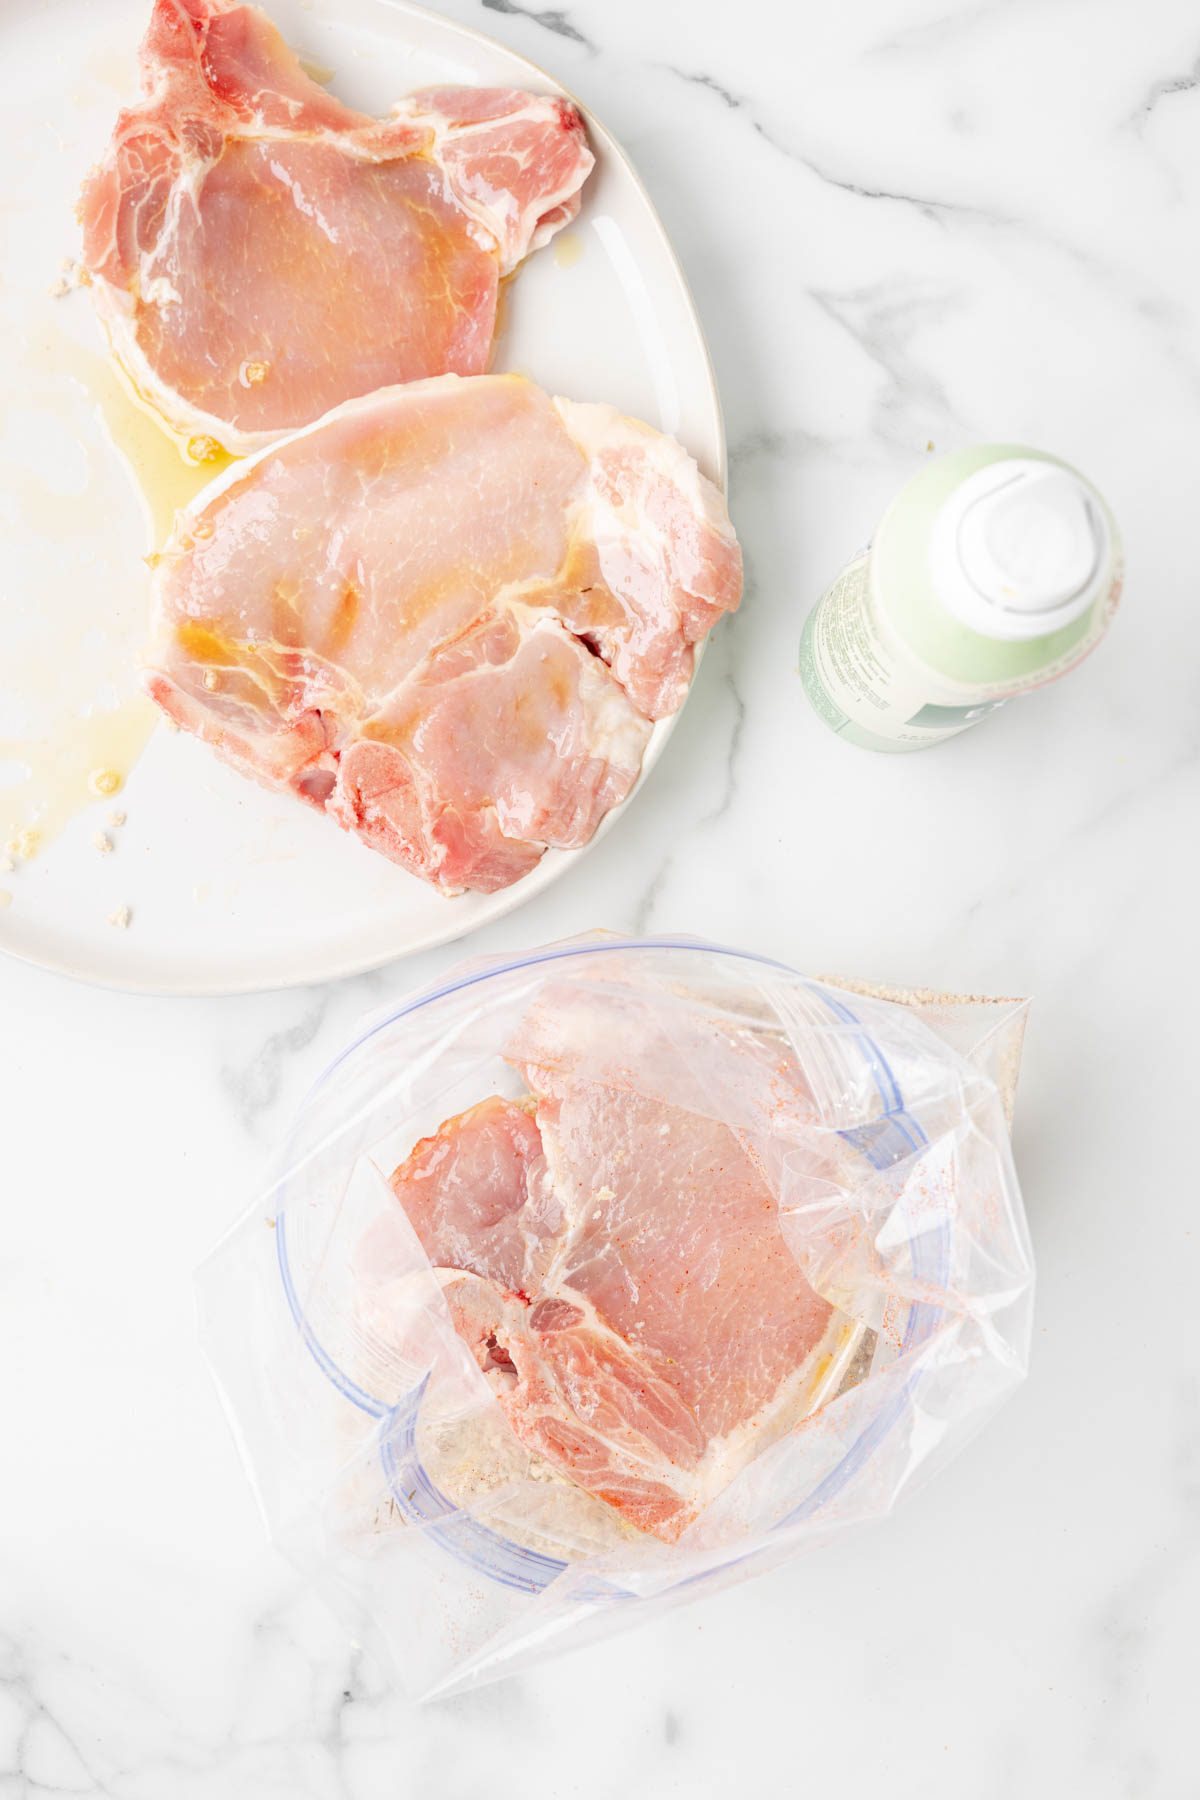 Uncooked pork chops are being pressed into a zip top bag containing a breadcrumb and spice mixture, prior to cooking in an air fryer. 